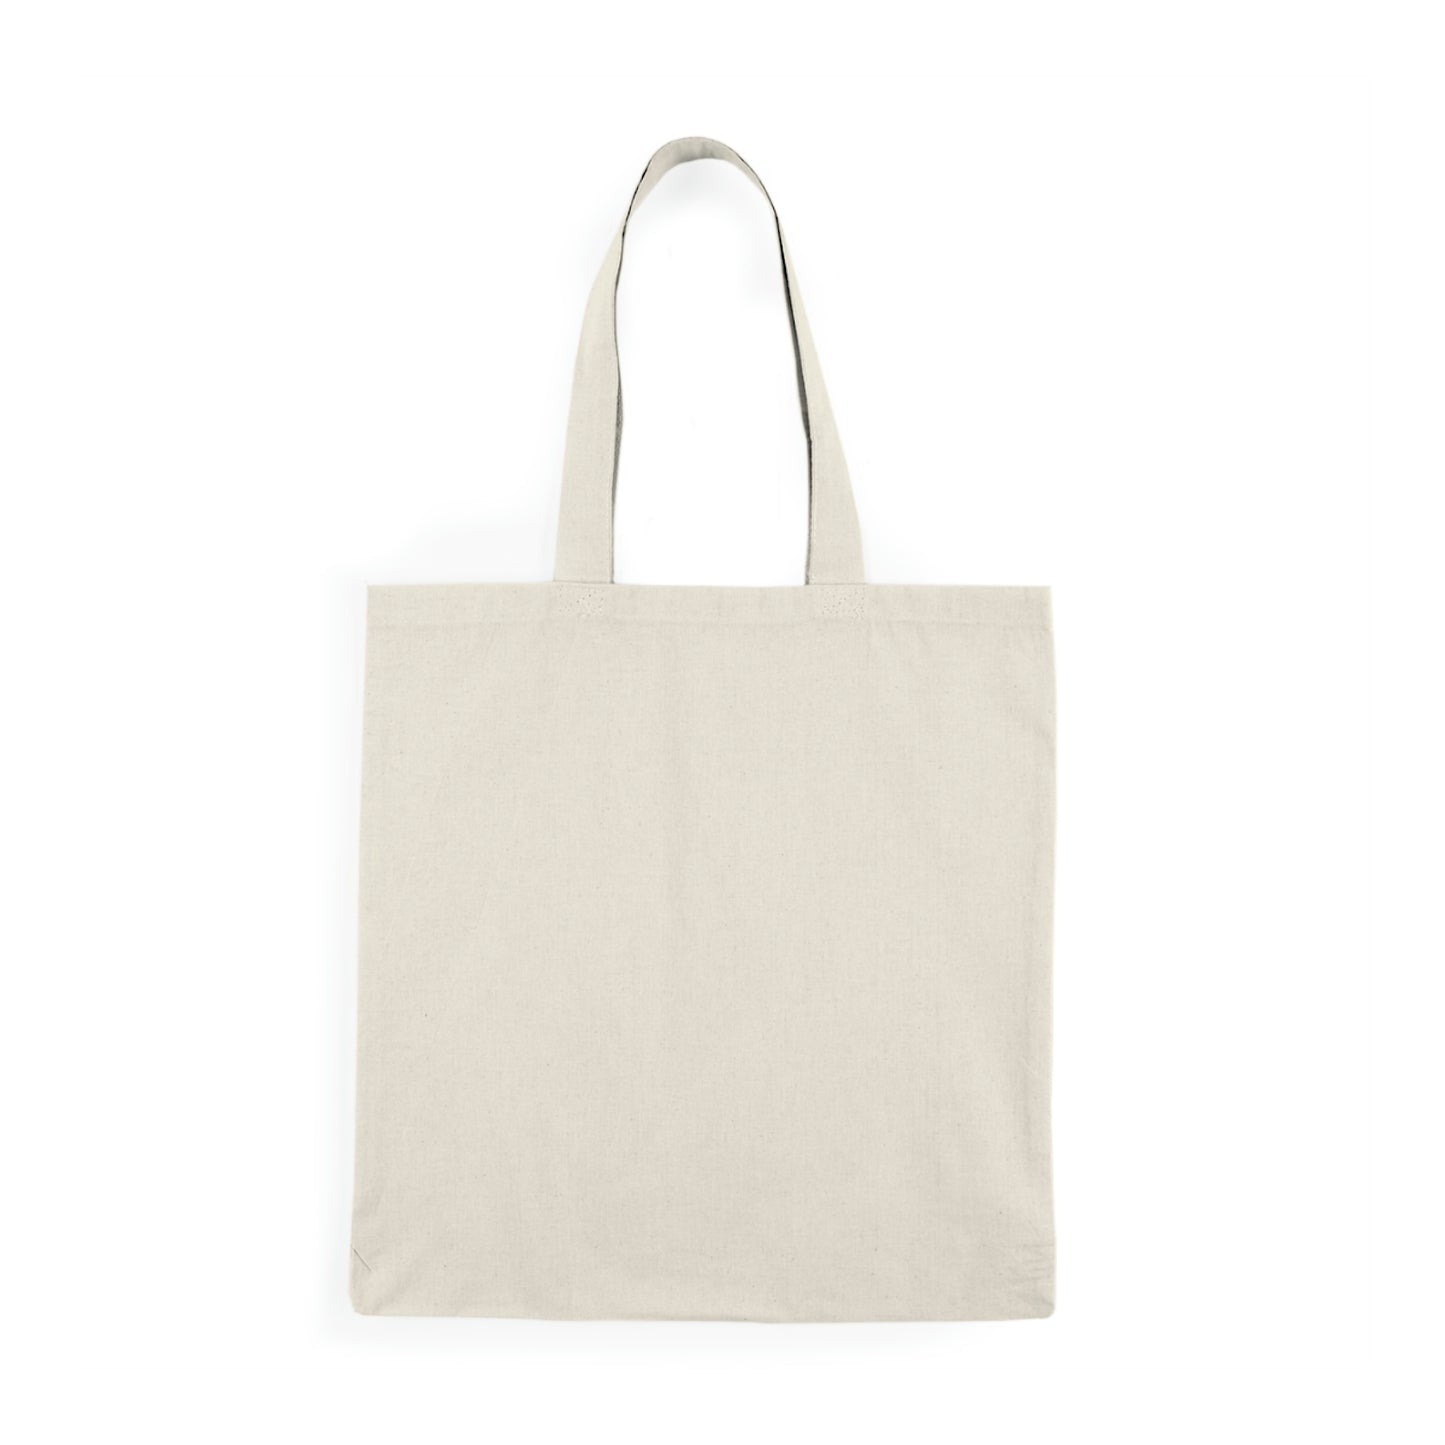 In Absence - Natural Tote Bag